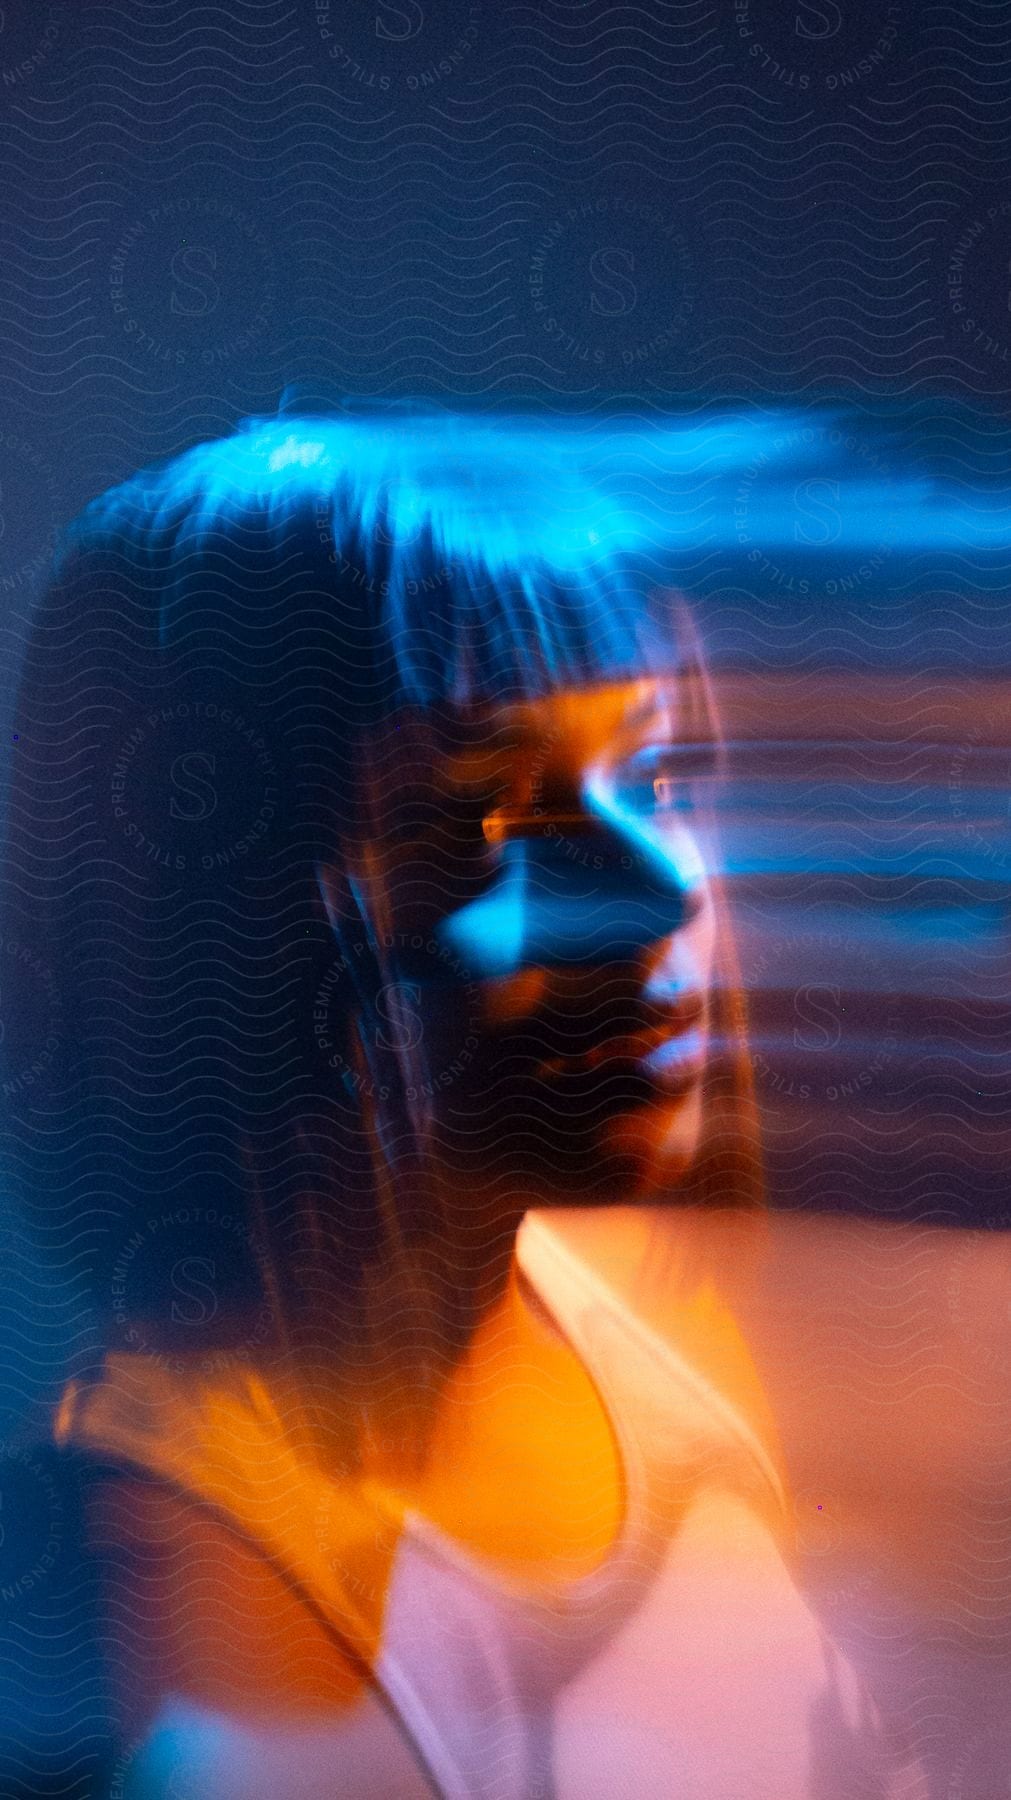 Bluehued long exposure portrait of a woman facing sideways with a trailing effect